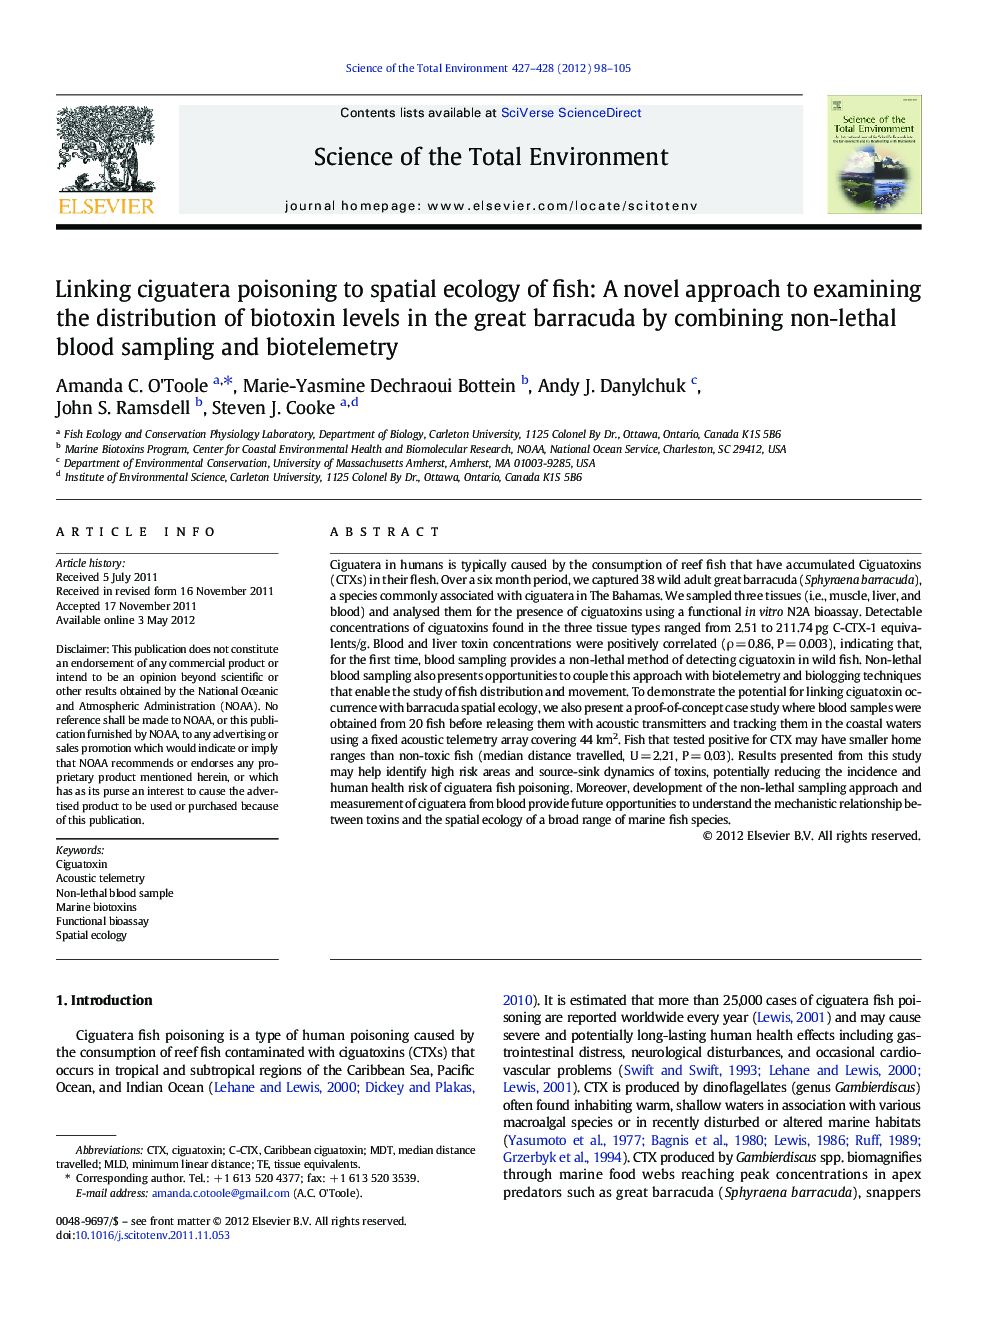 Linking ciguatera poisoning to spatial ecology of fish: A novel approach to examining the distribution of biotoxin levels in the great barracuda by combining non-lethal blood sampling and biotelemetry